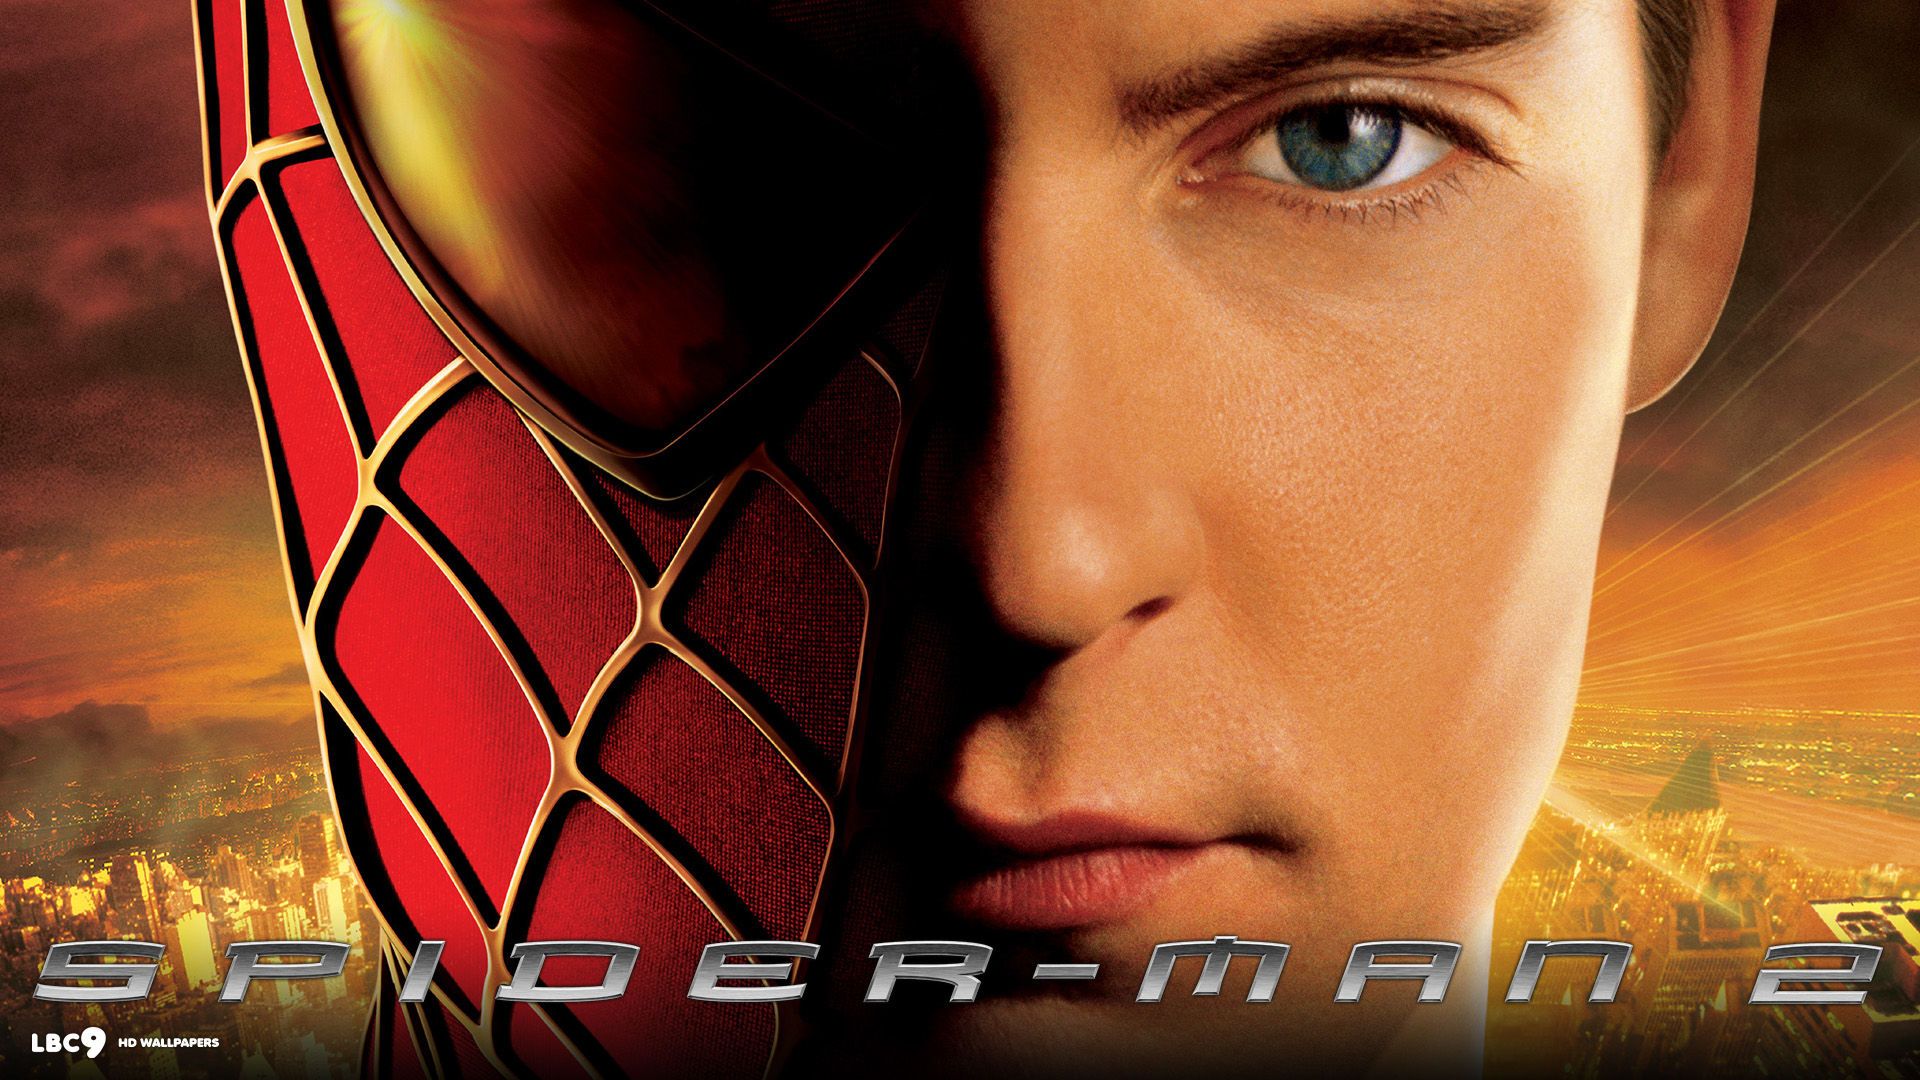 Spider man 2 wallpaper 1 / 5 movie hd backgrounds